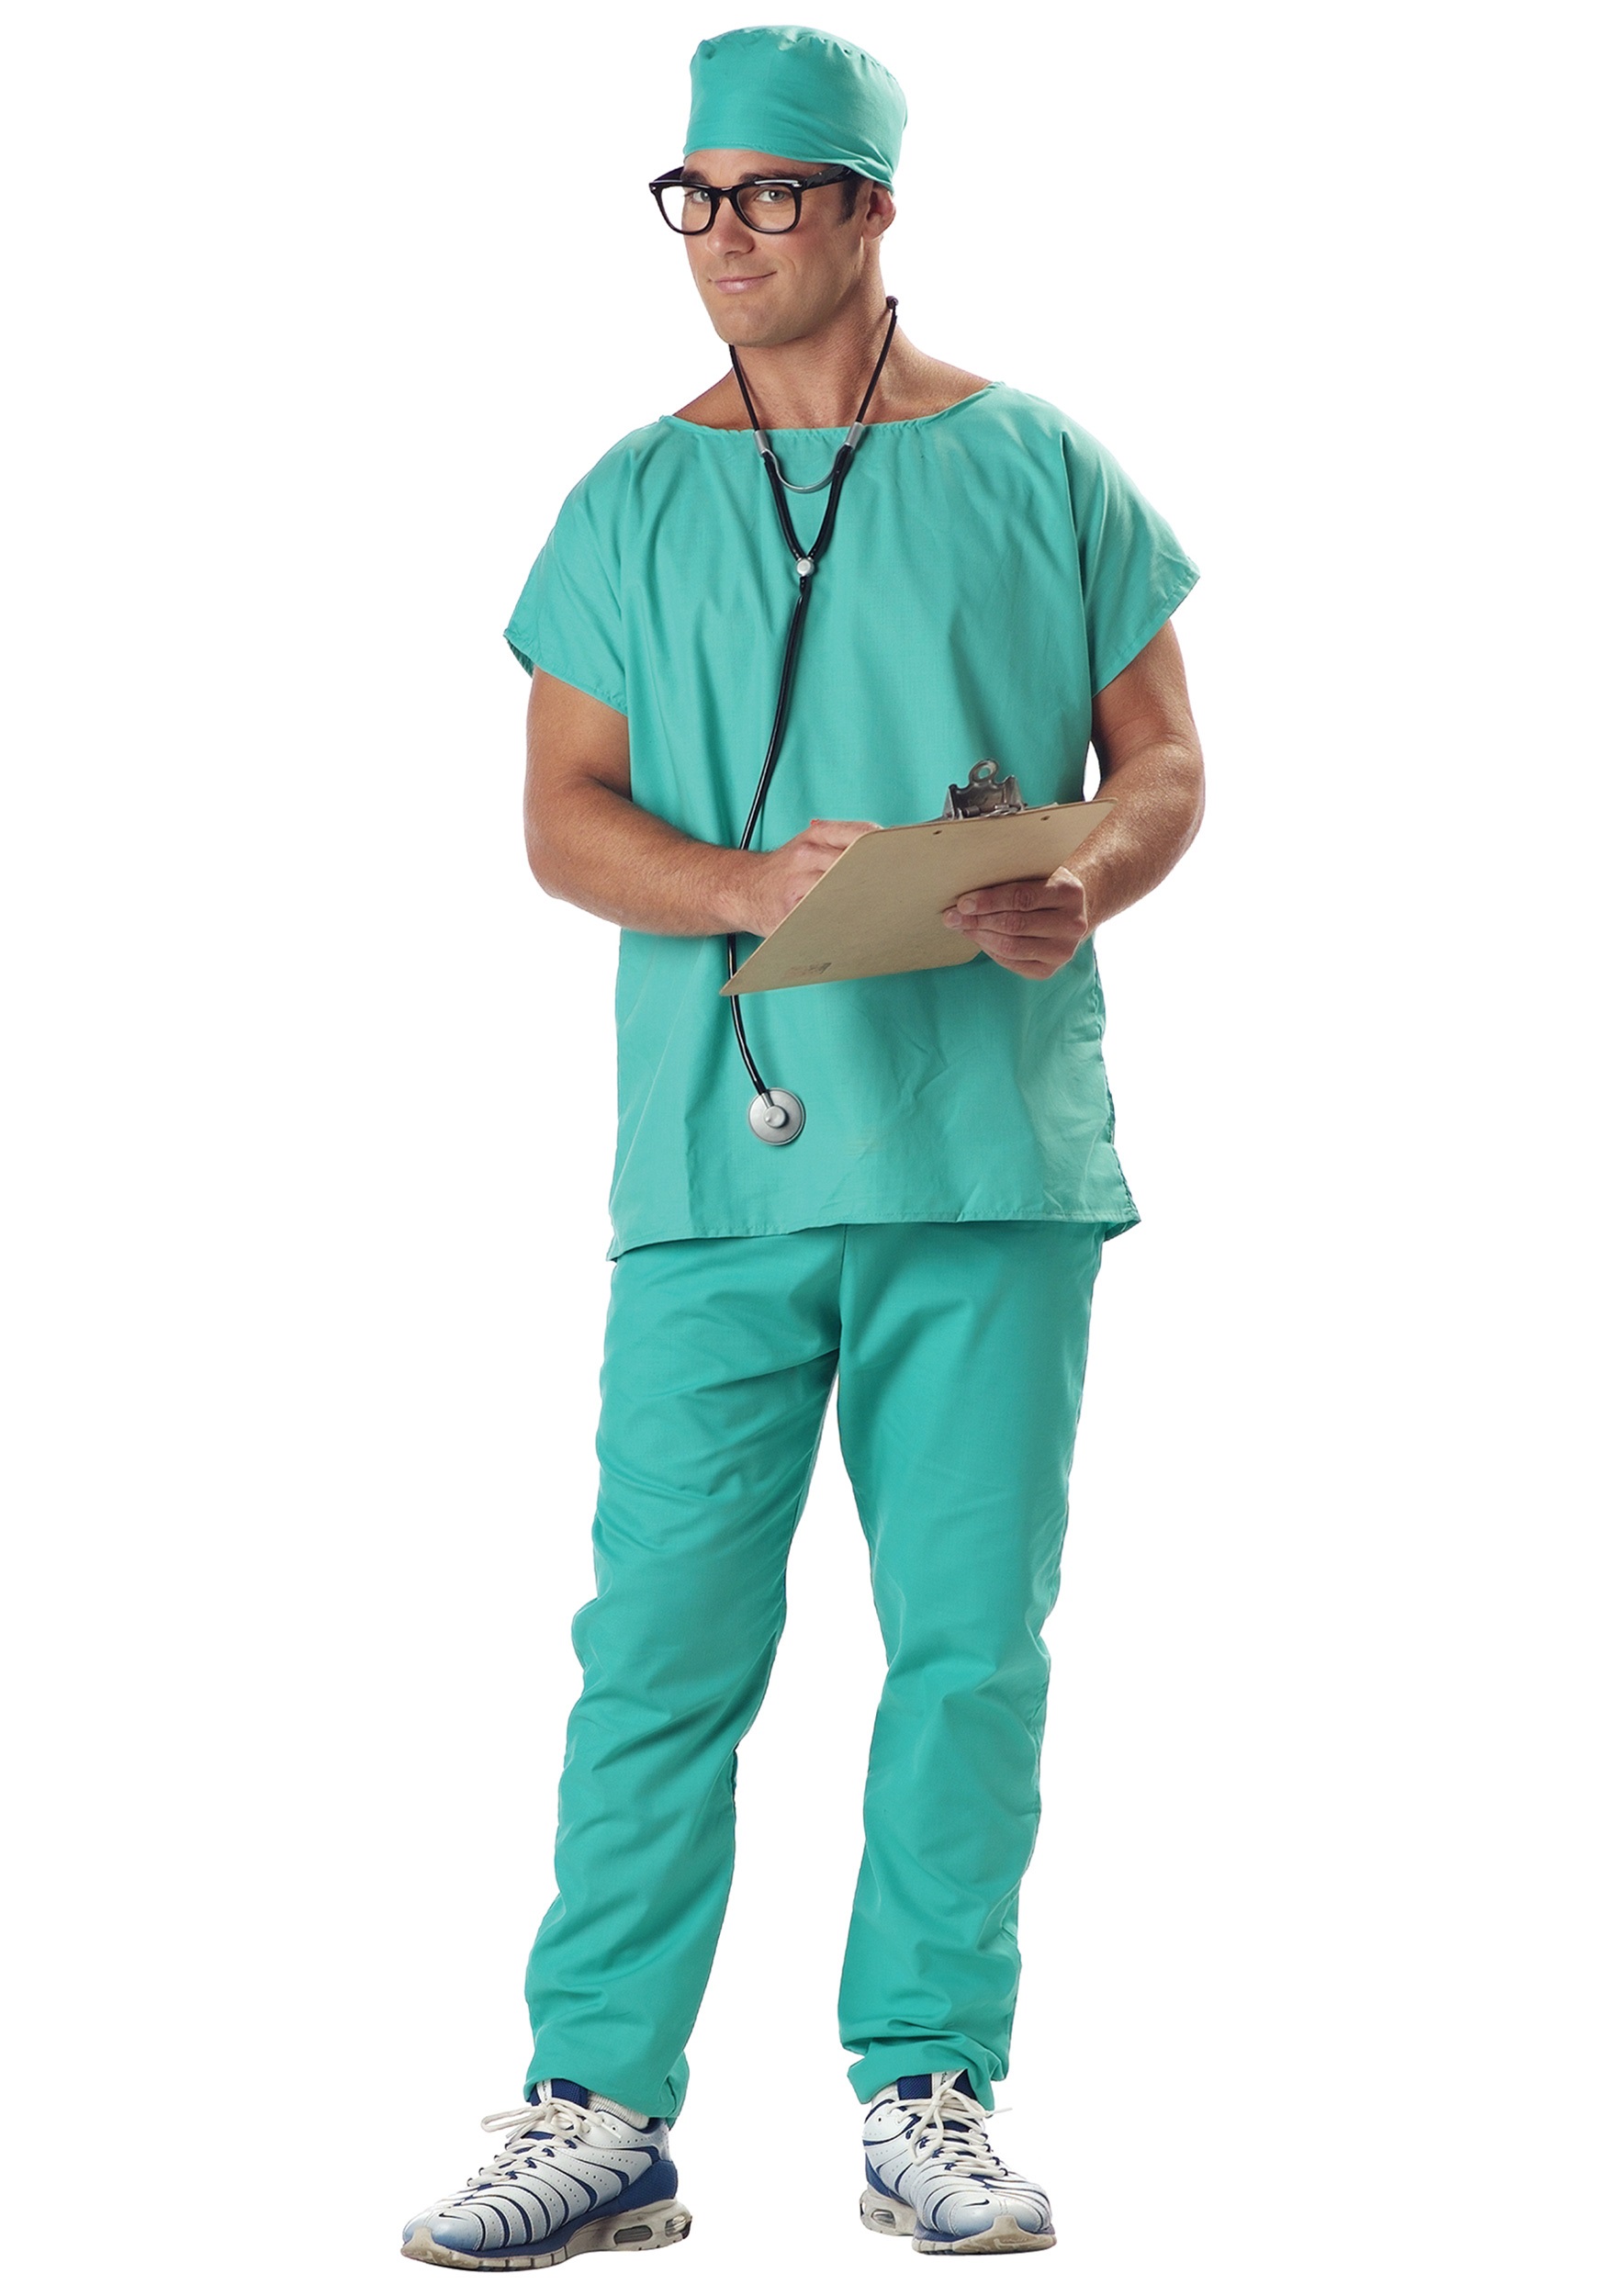 Photos - Fancy Dress California Costume Collection Green Scrubs Surgical Costume Blue CA01027 